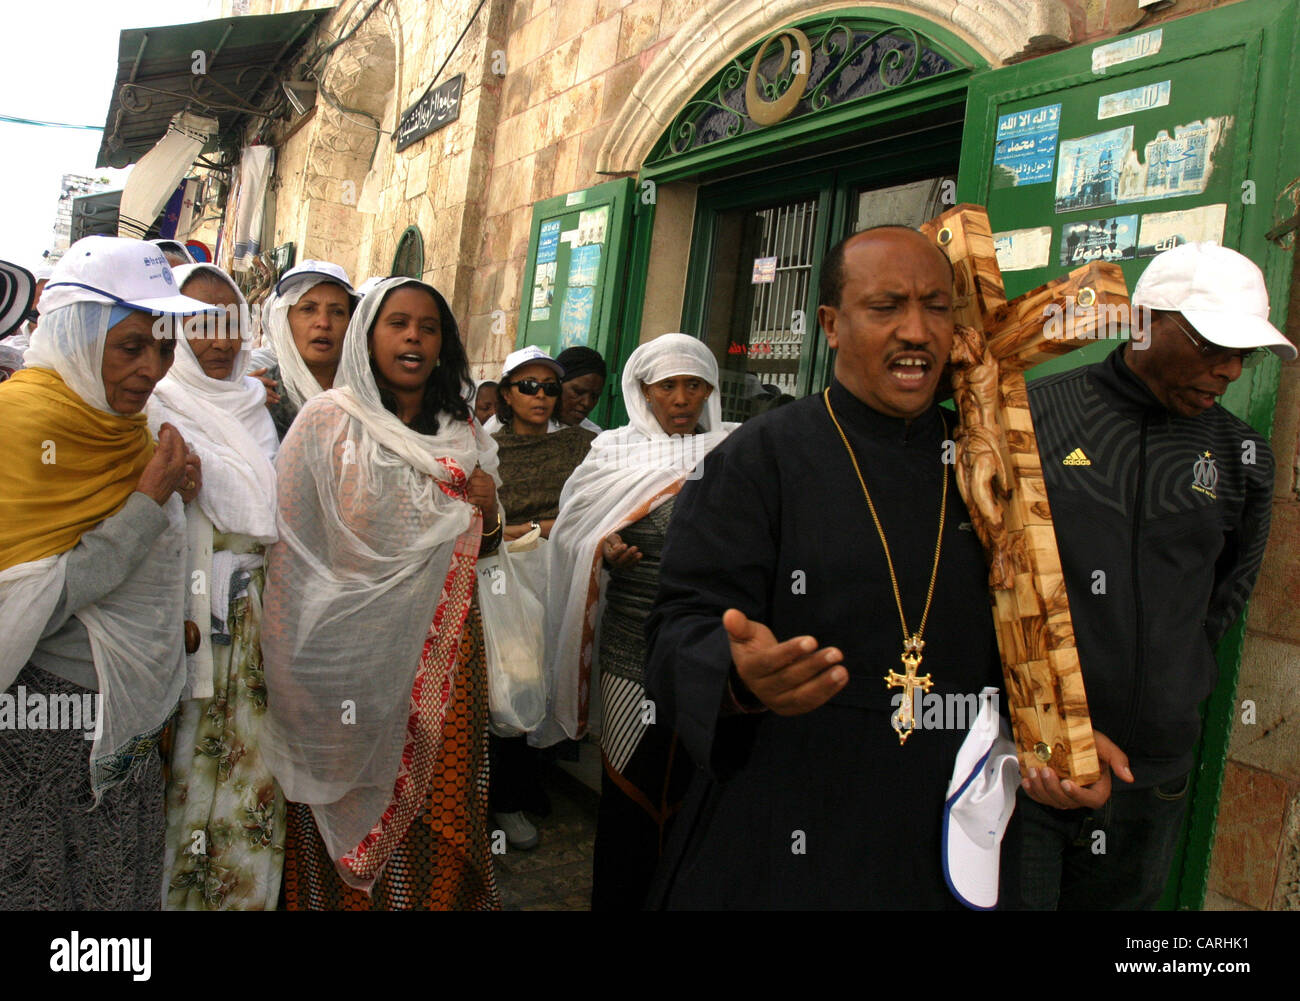 April 13, 2012 - Jerusalem, Jerusalem, Palestinian Territory - Orthodox Christian worshippers from Ethiopia carry a large cross during a Good Friday procession on the Via Dolorosa, retracing the route Jesus Christ walked to his crucifixion in Jerusalem, Israel, 13 April 2012. Thousands of pilgrims,  Stock Photo